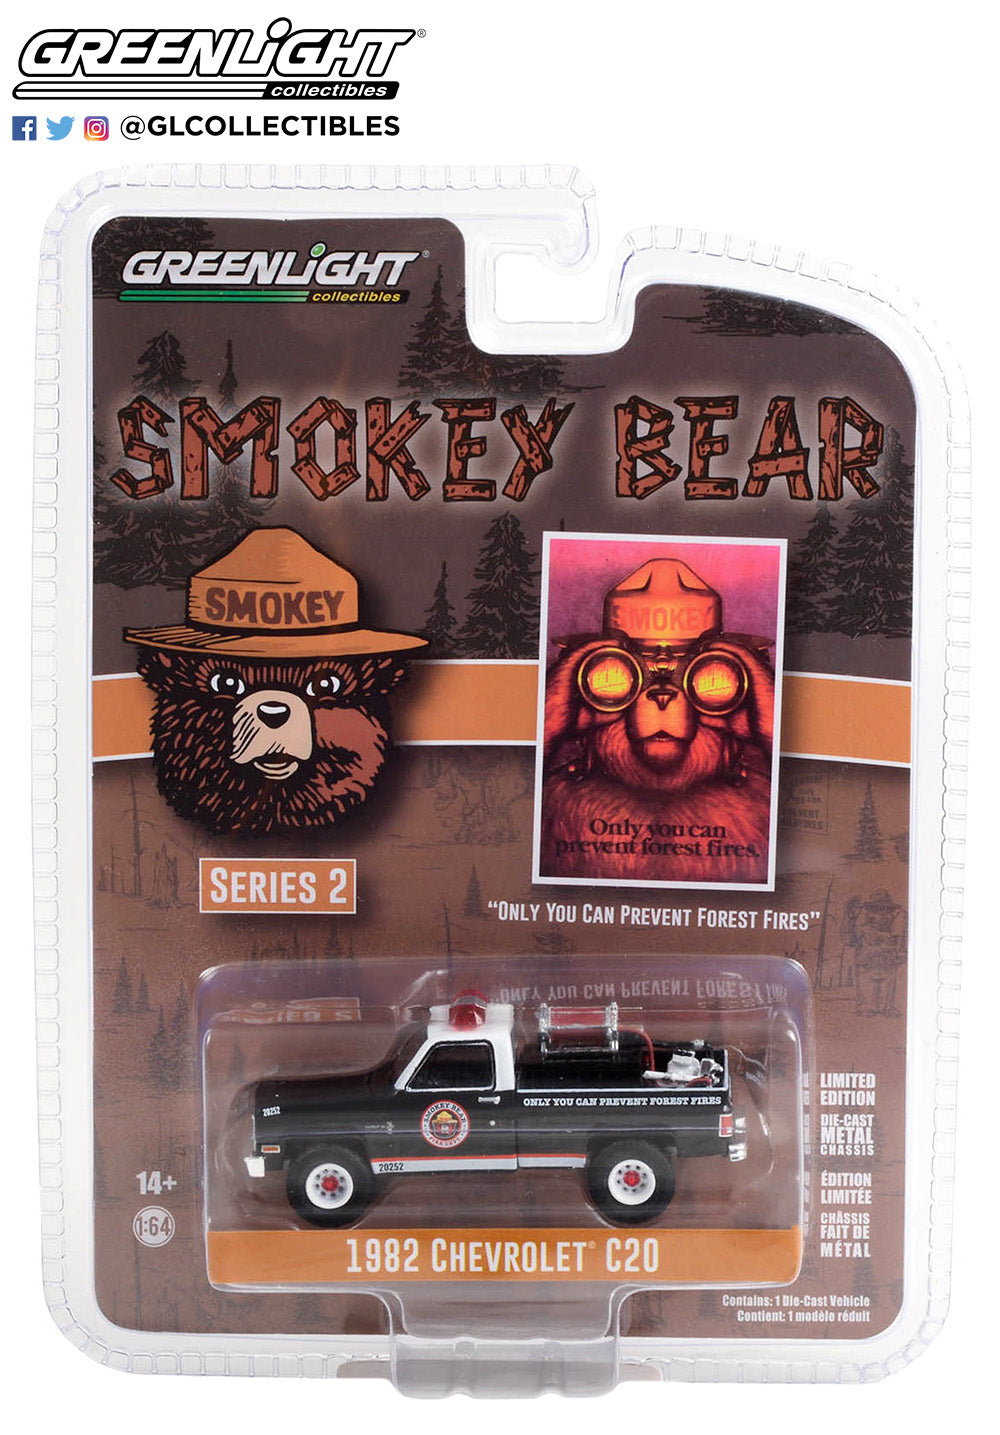 Smokey Bear Series 2 - 1982 Chevrolet C20 Custom Deluxe with Fire Equipment, Hose and Tank “Only You Can Prevent Forest Fires